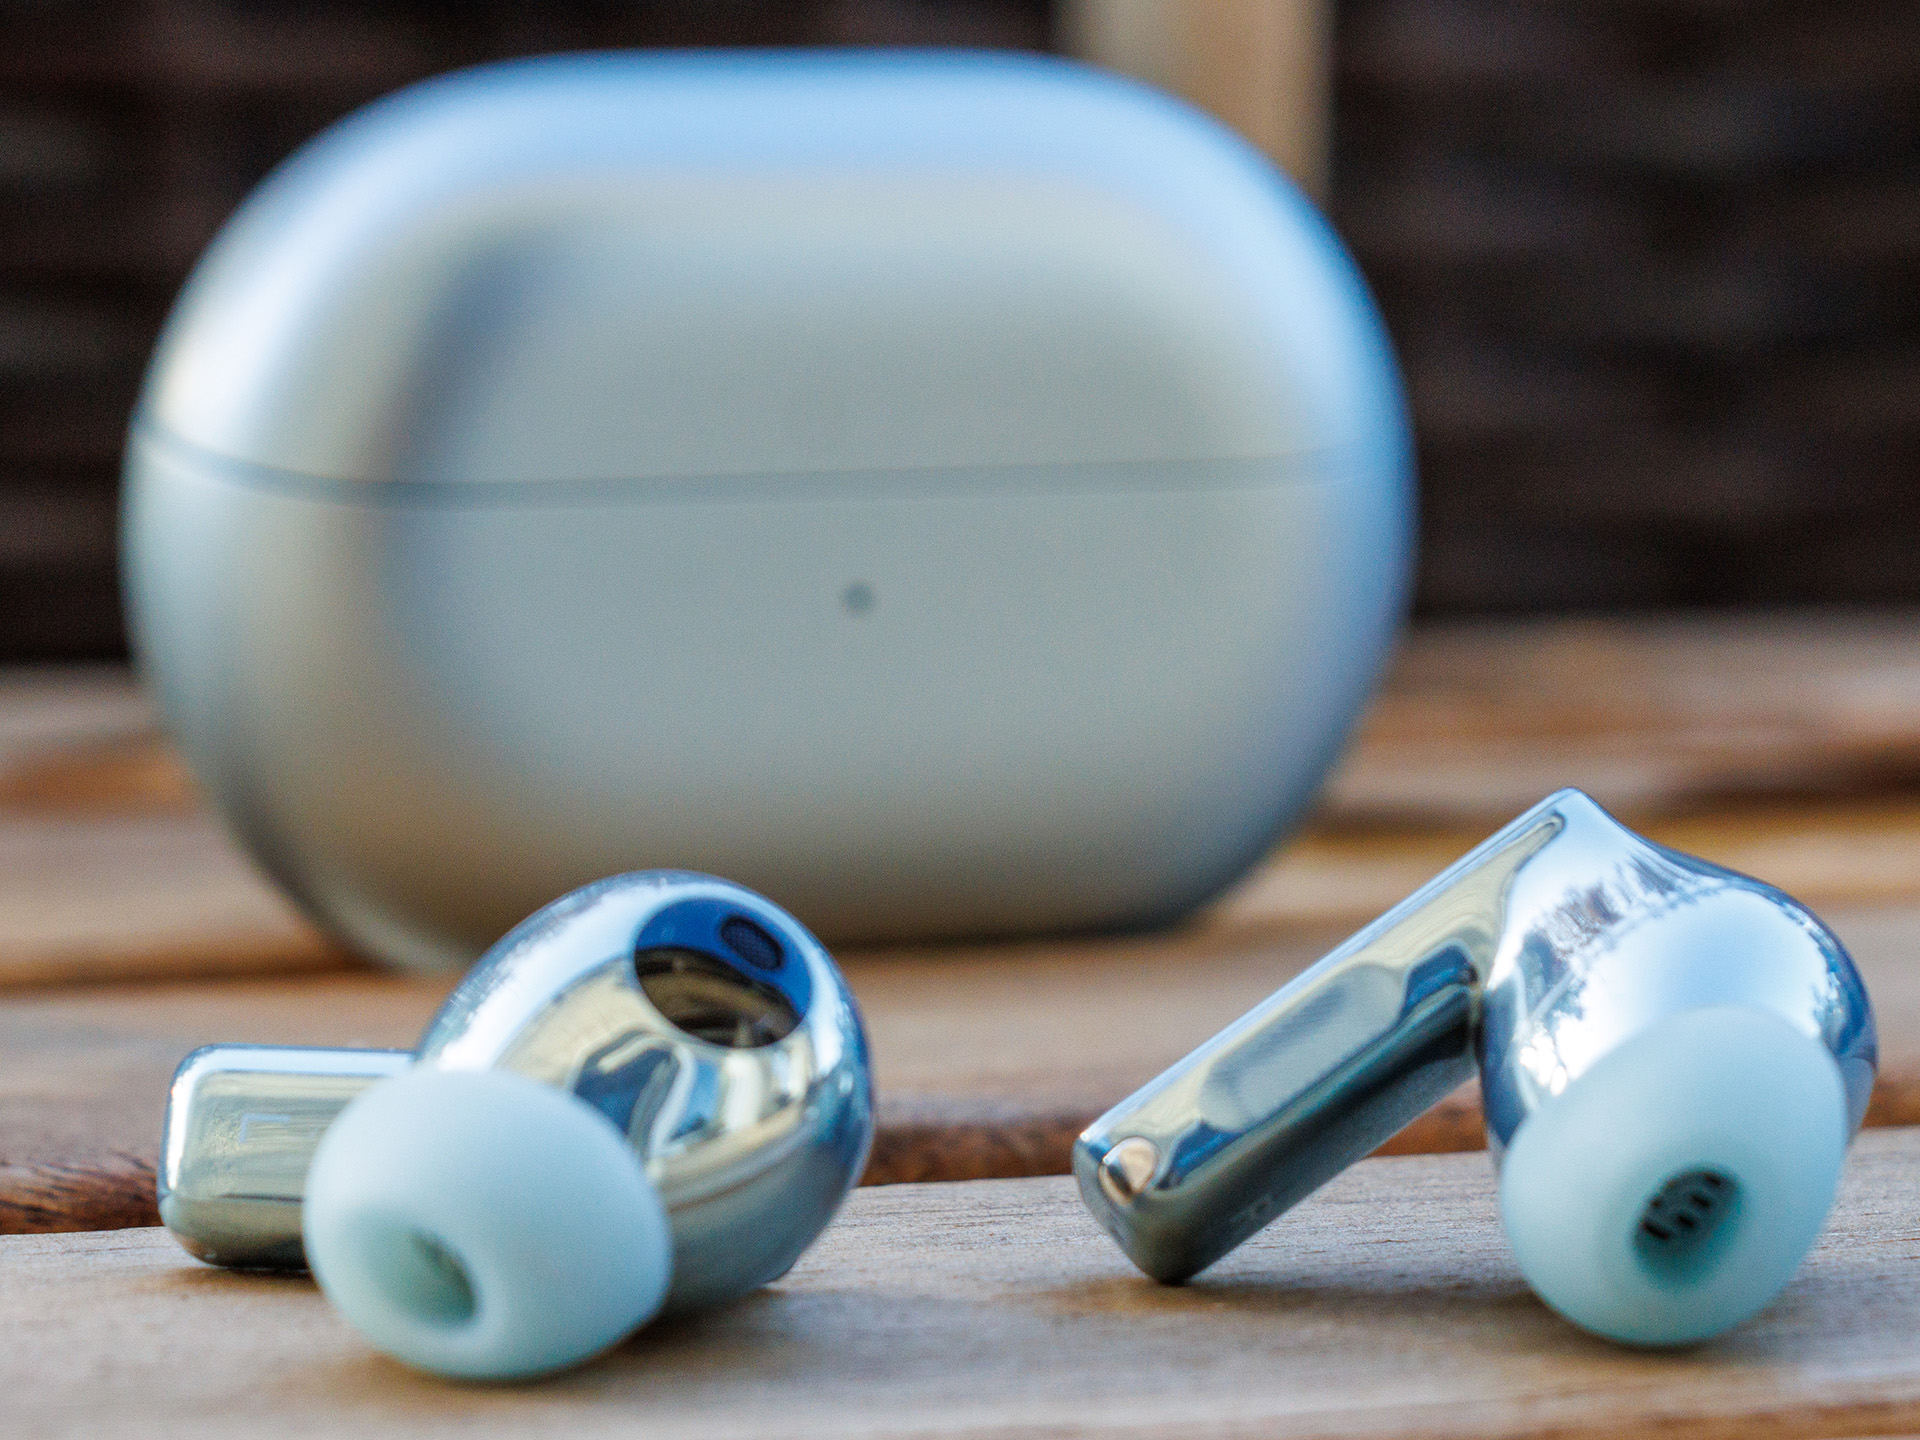 Huawei FreeBuds Pro 3 Review: the new king of TWS headphones